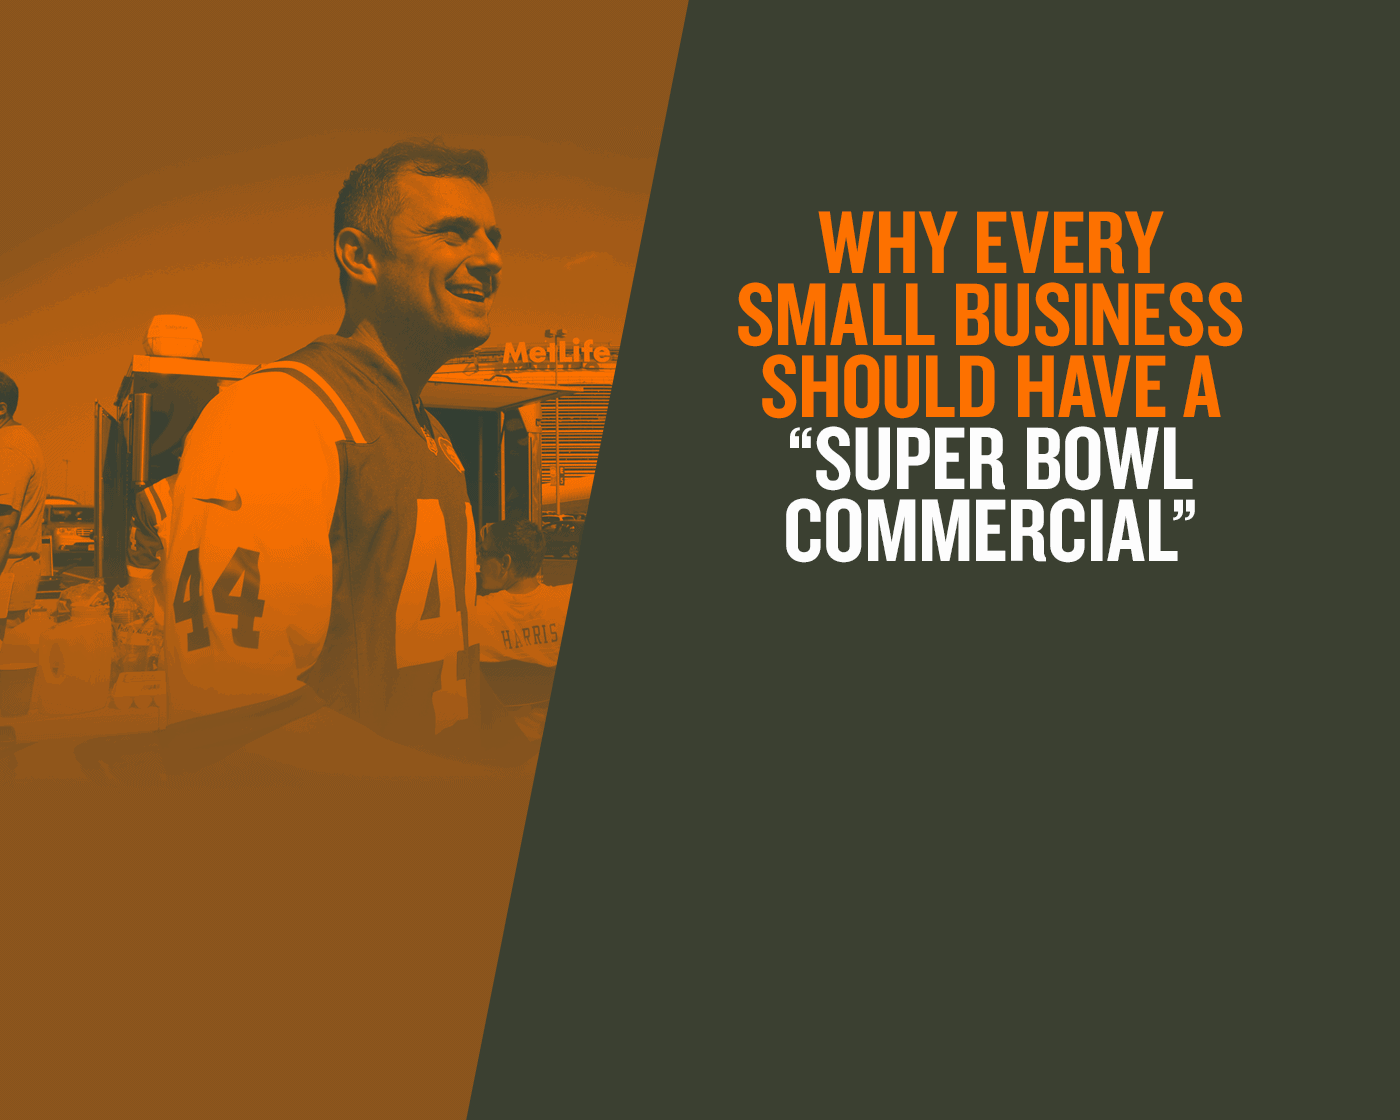 Why Every Small Business Should Have a “Super Bowl Commercial”